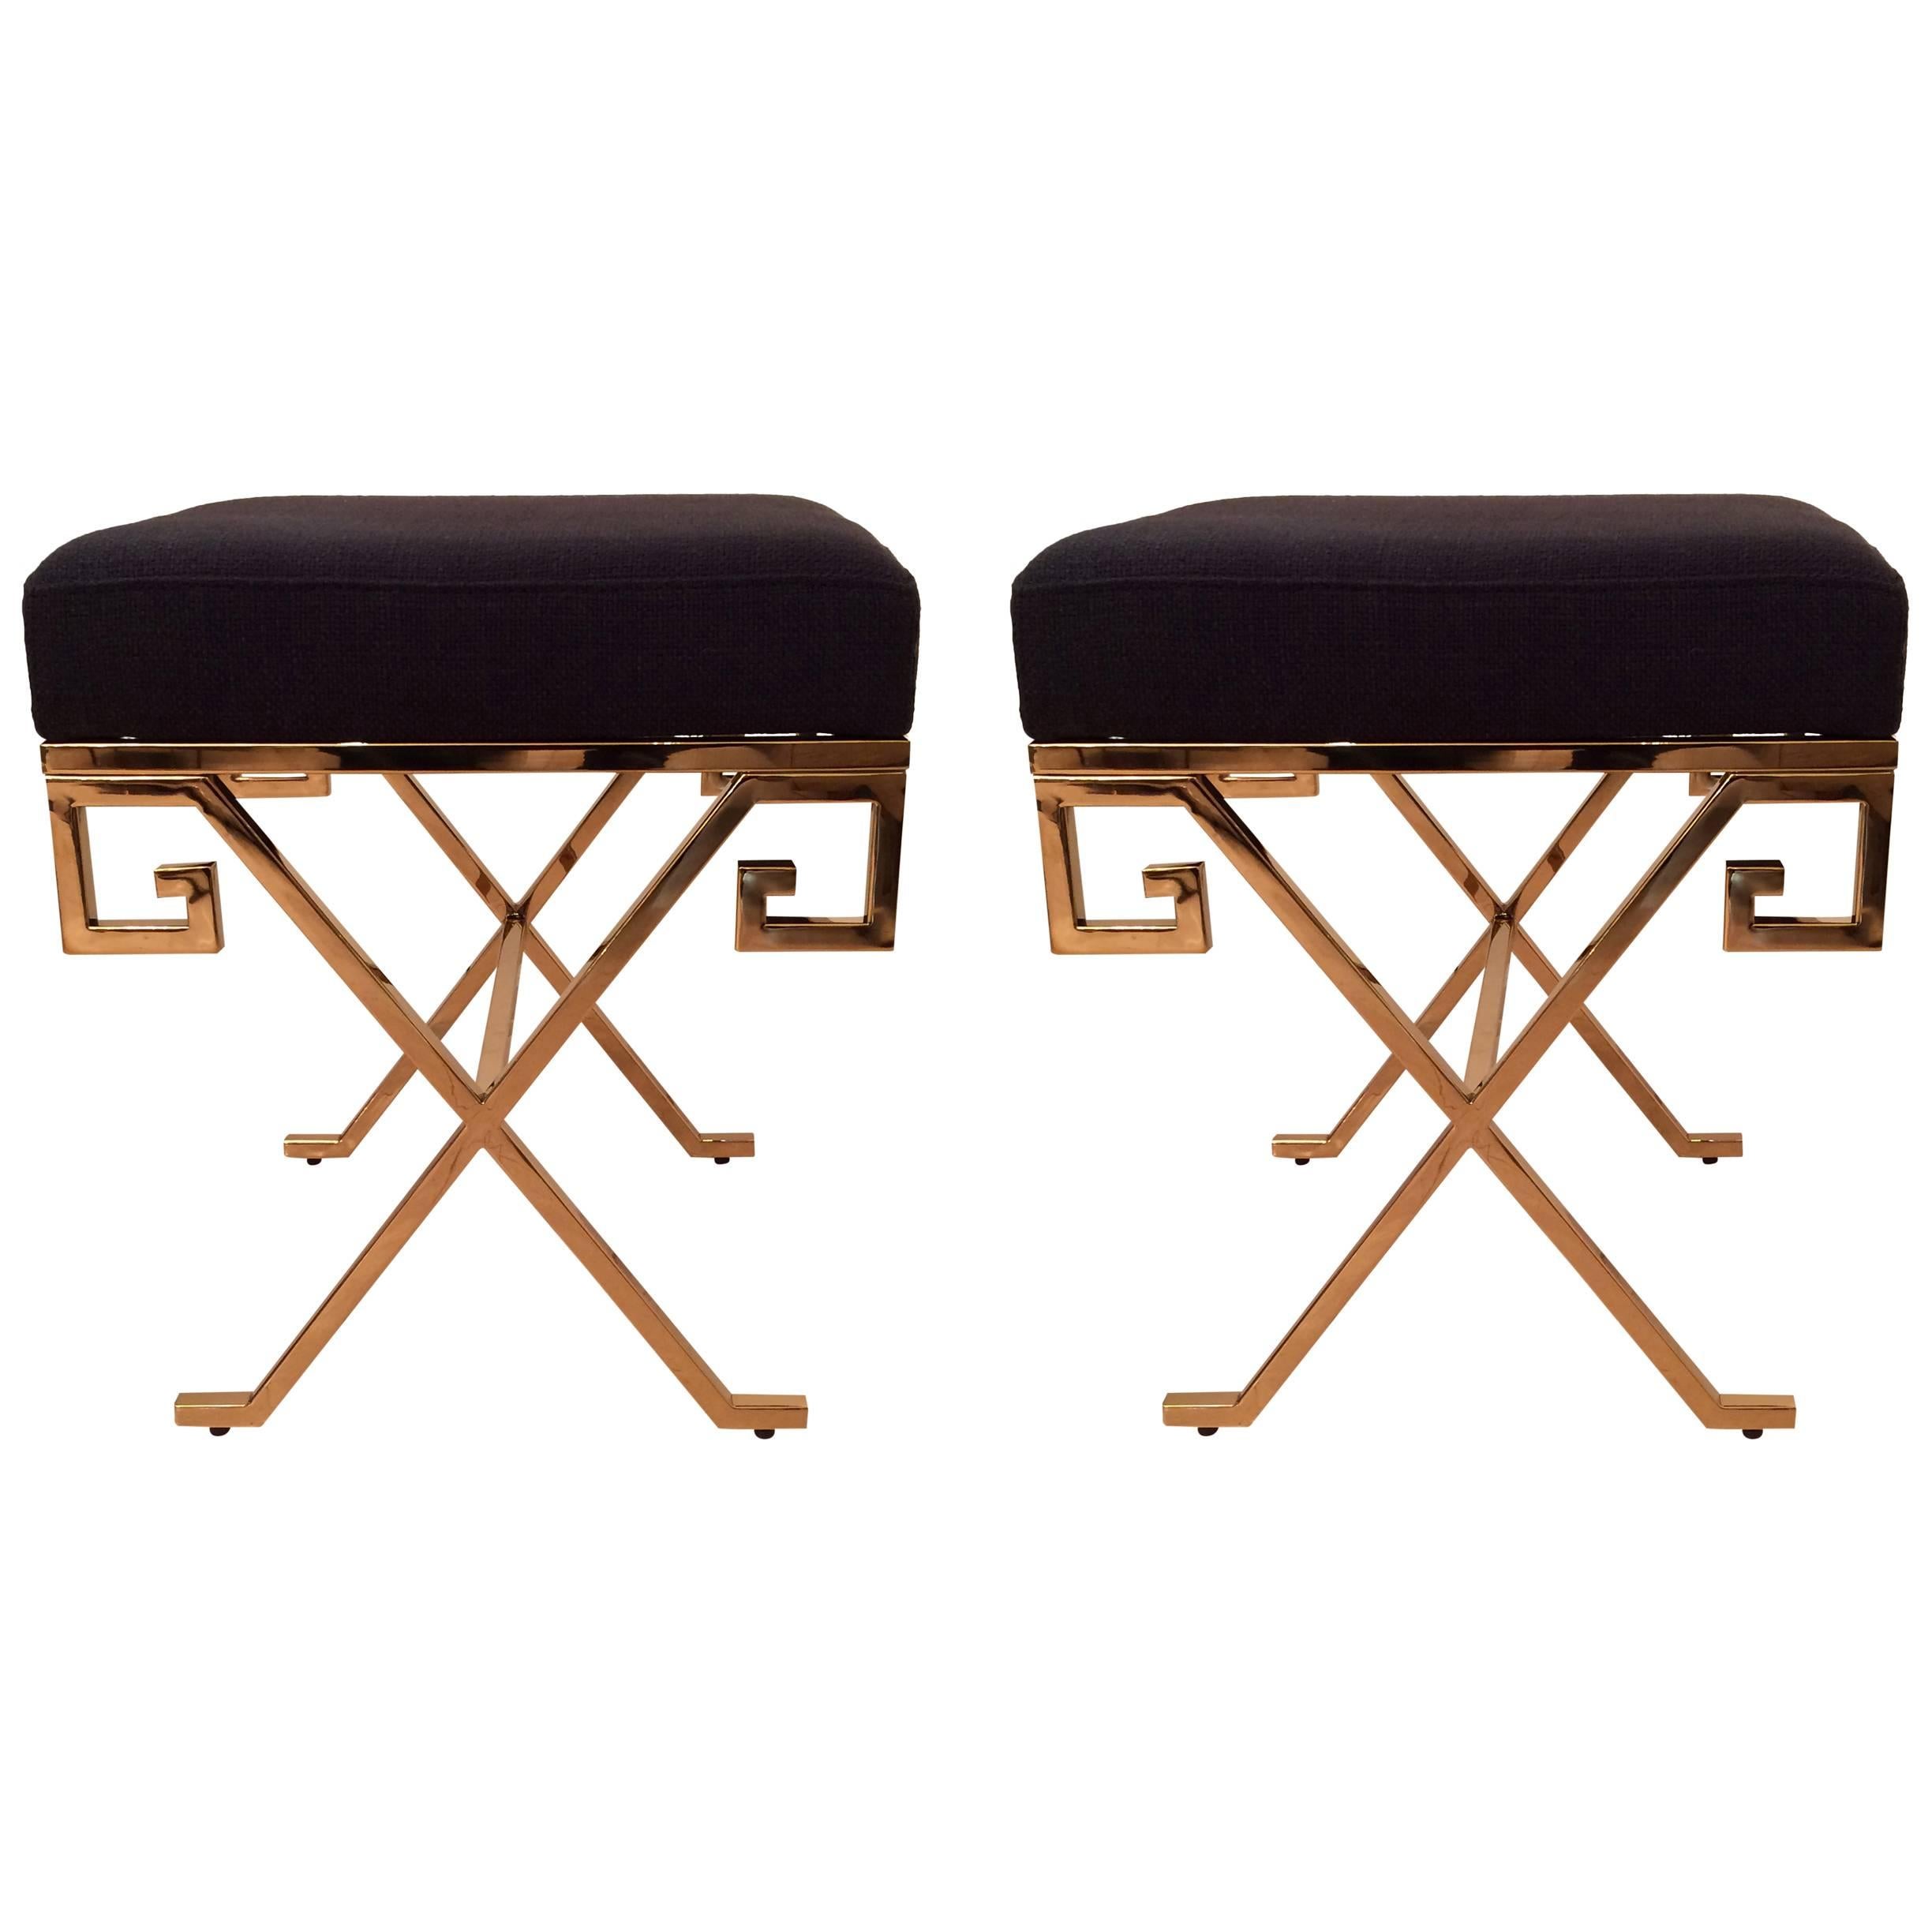 Pair of Gold Stools For Sale